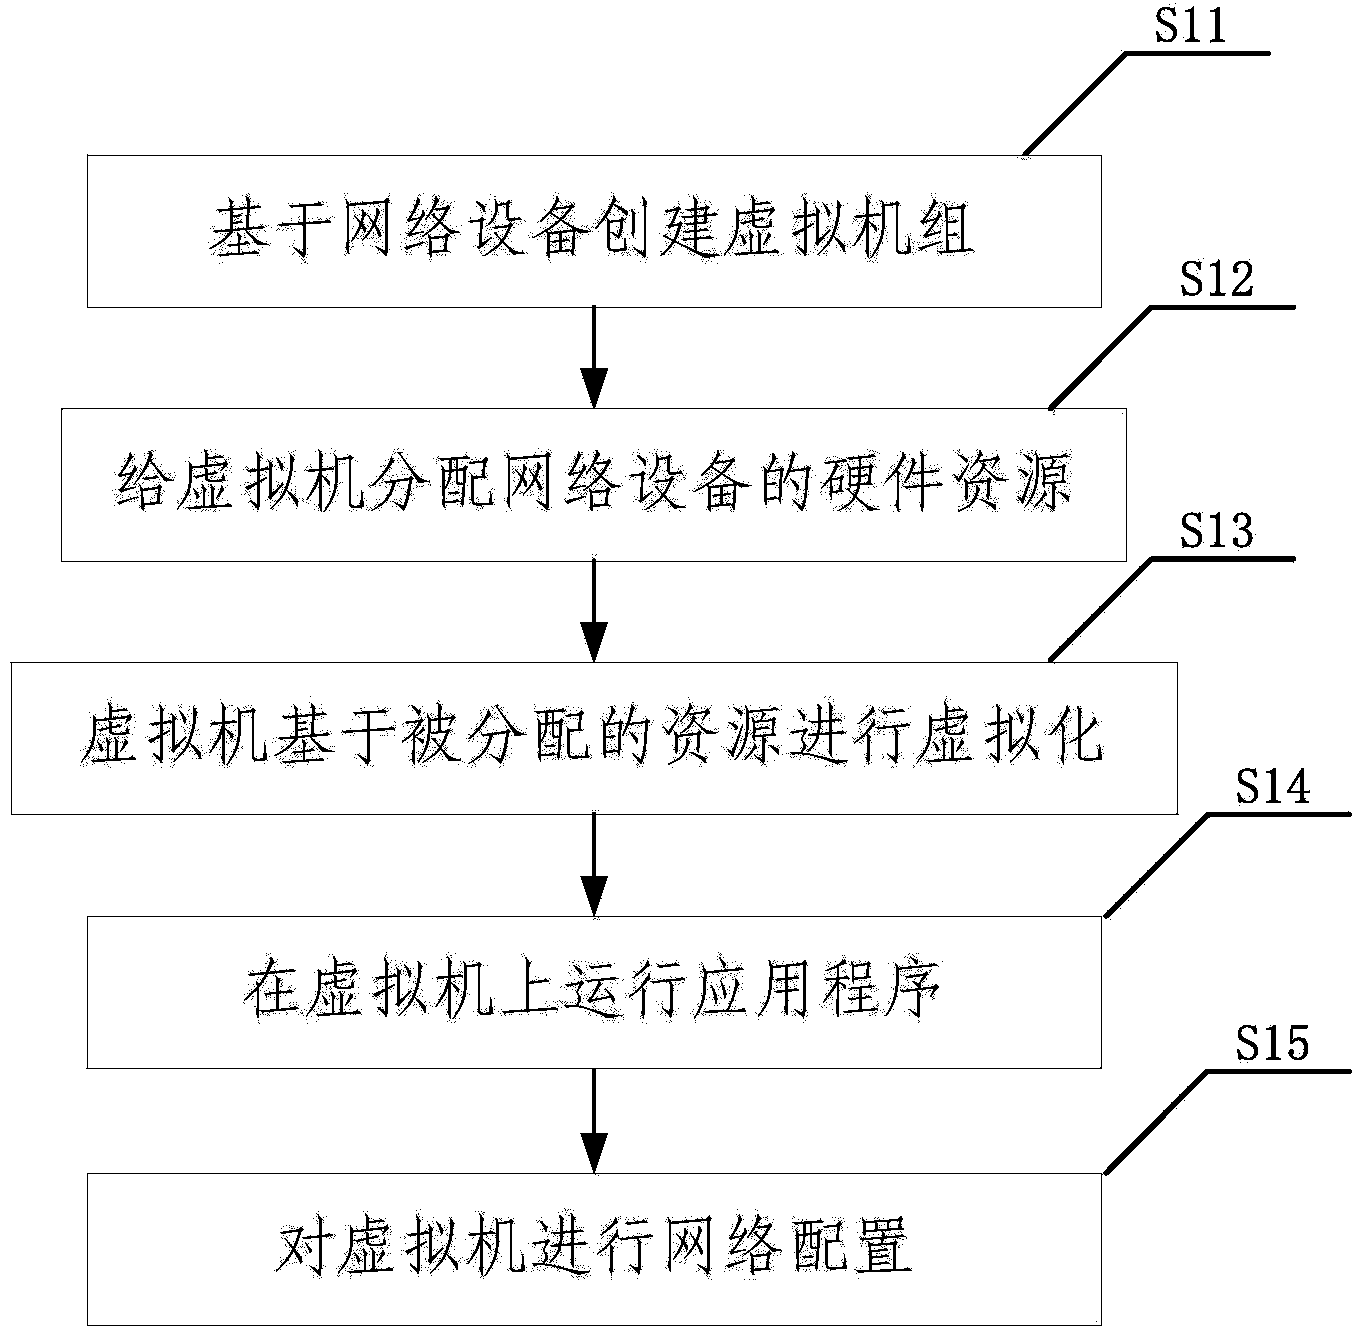 Multi-network fusion system and multi-network fusion method based on virtual machine